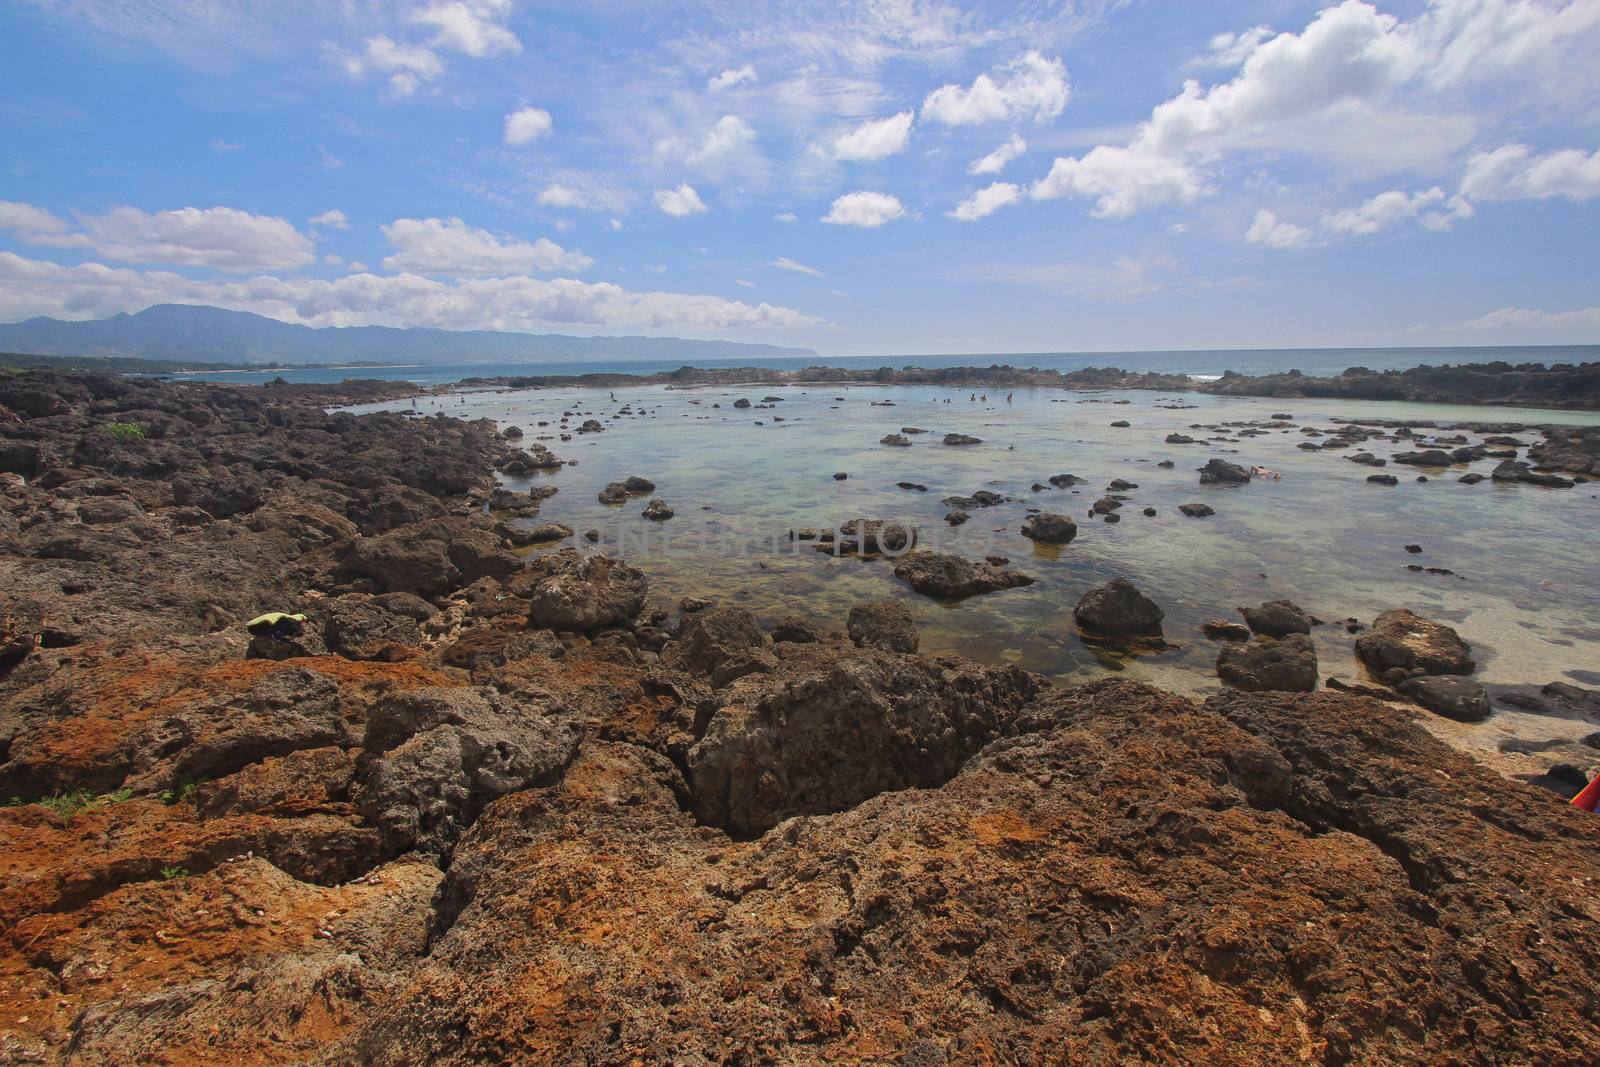 Pupukea tide pools on the north shore of Oahu, Hawaii by sgoodwin4813